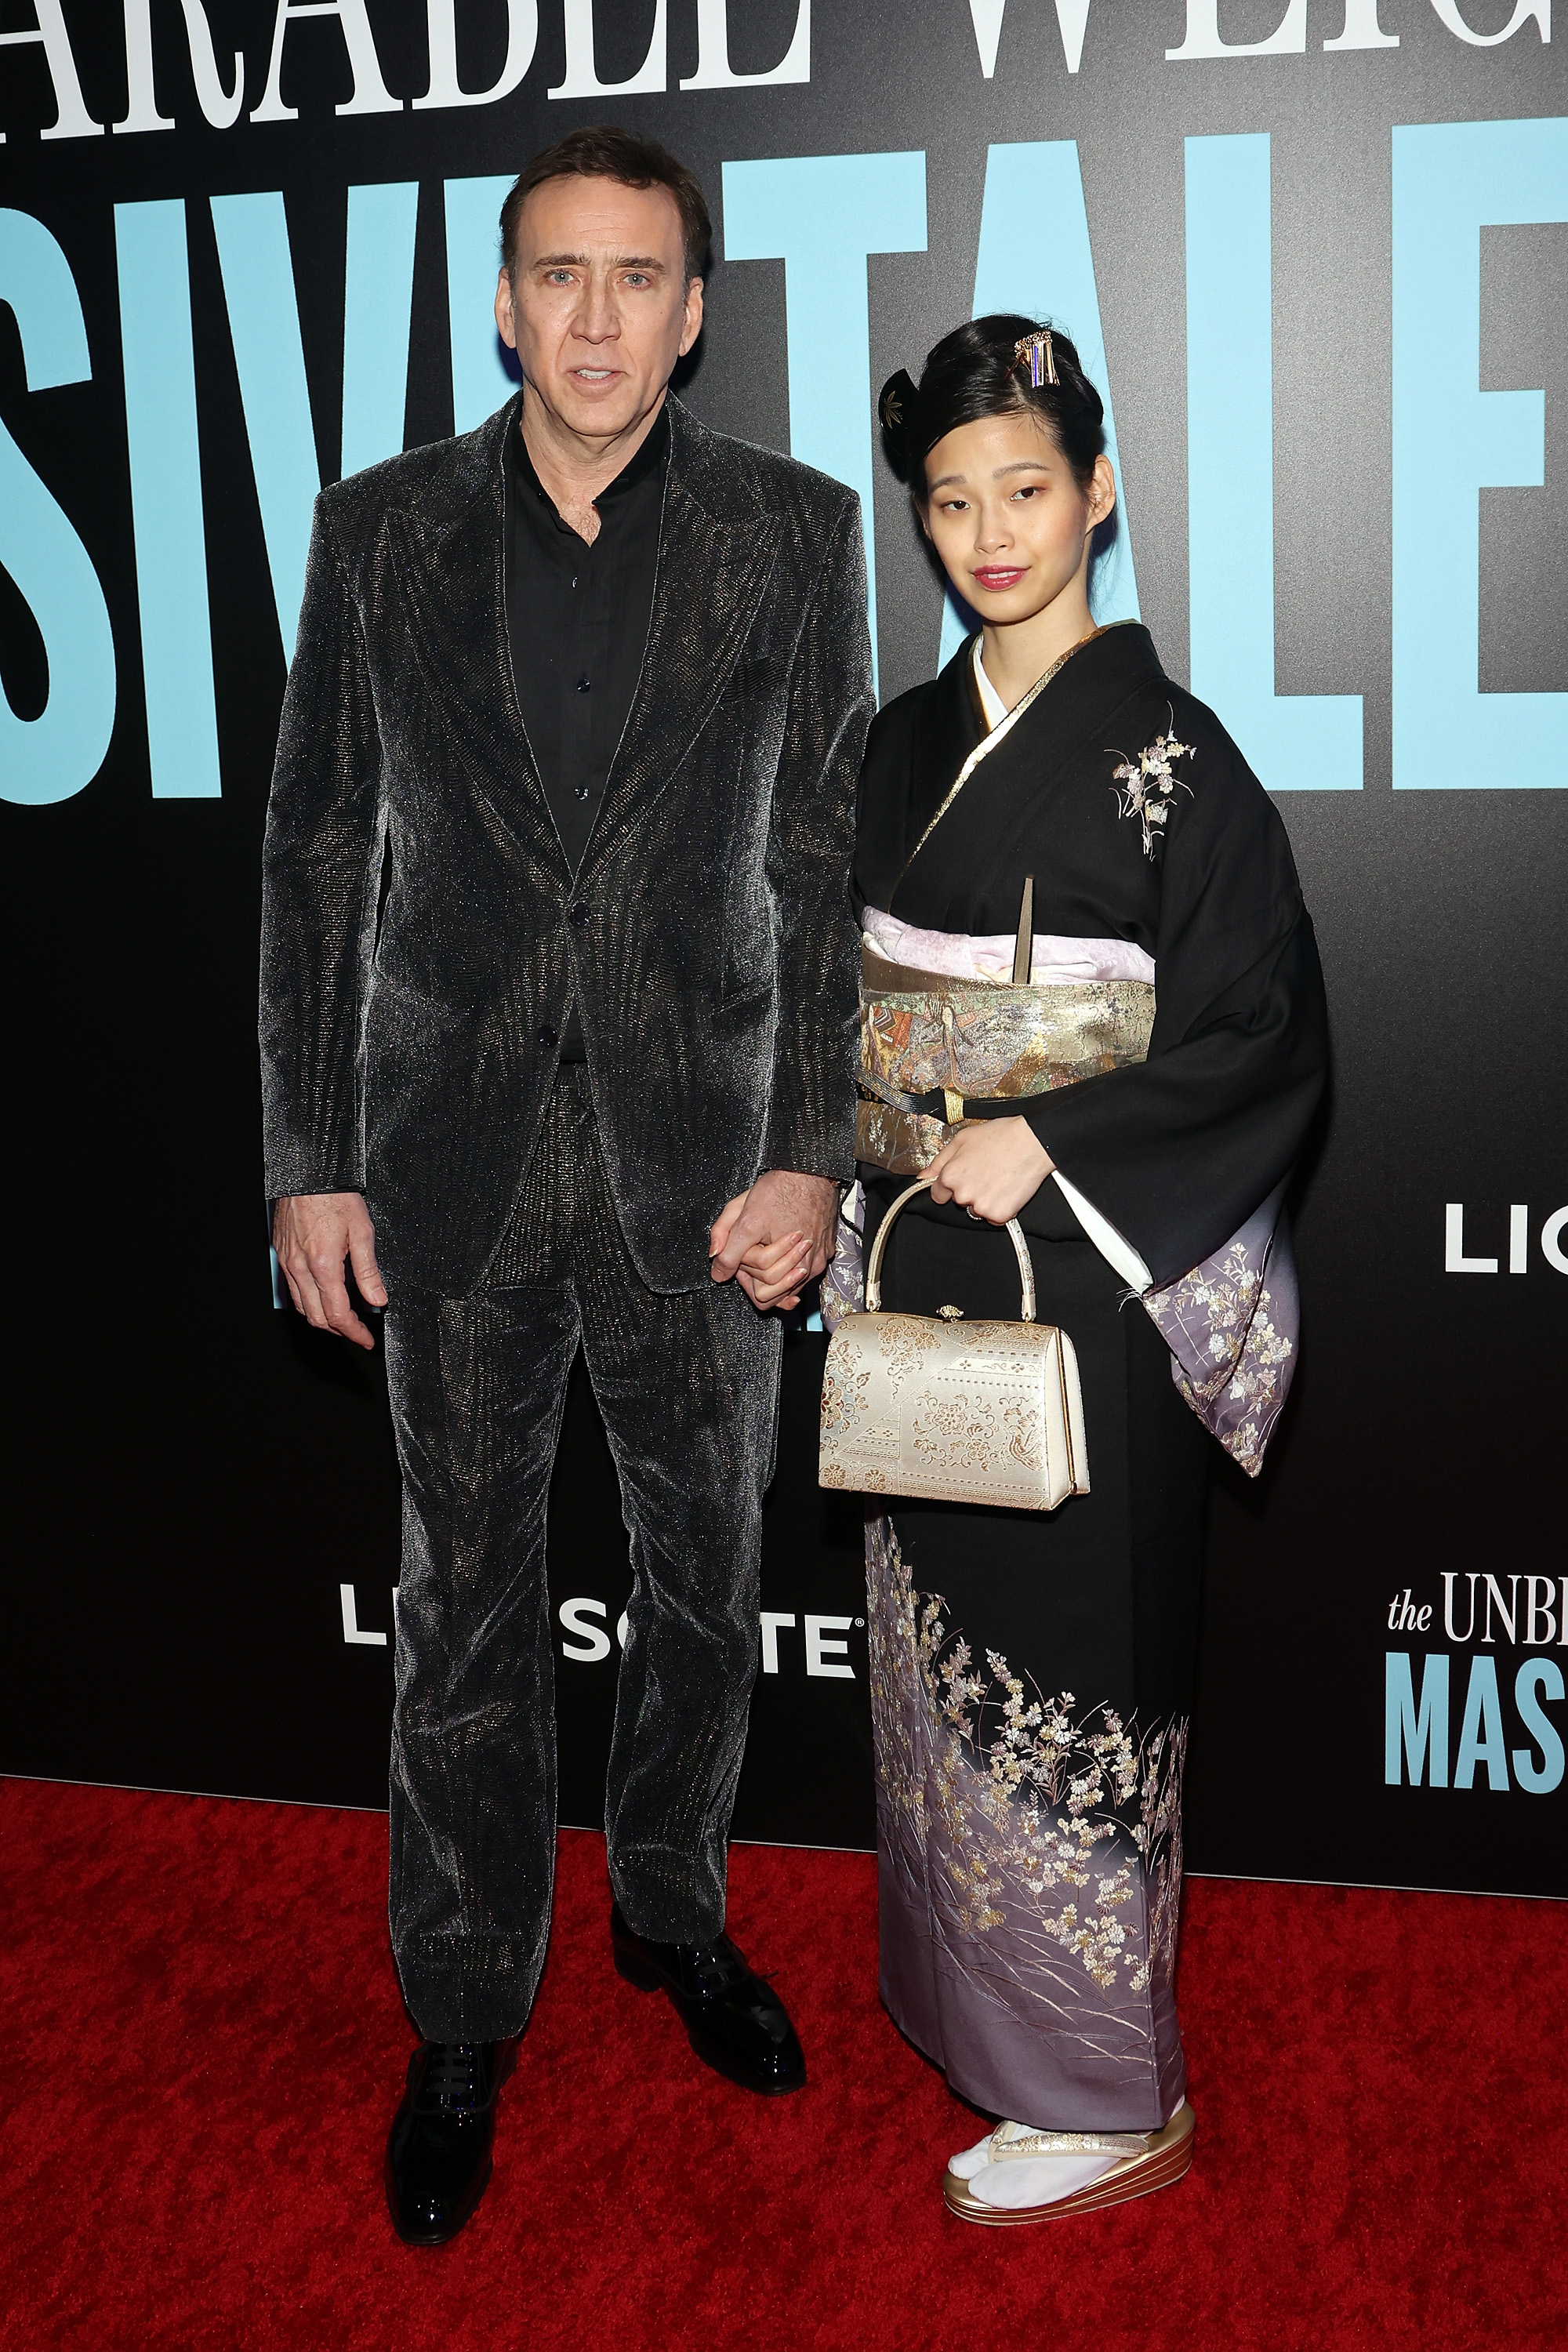 Nicolas Cage and Riko Shibata attend the New York premiere of The Unbearable Weight of Massive Talent on April 10 in New York City. 